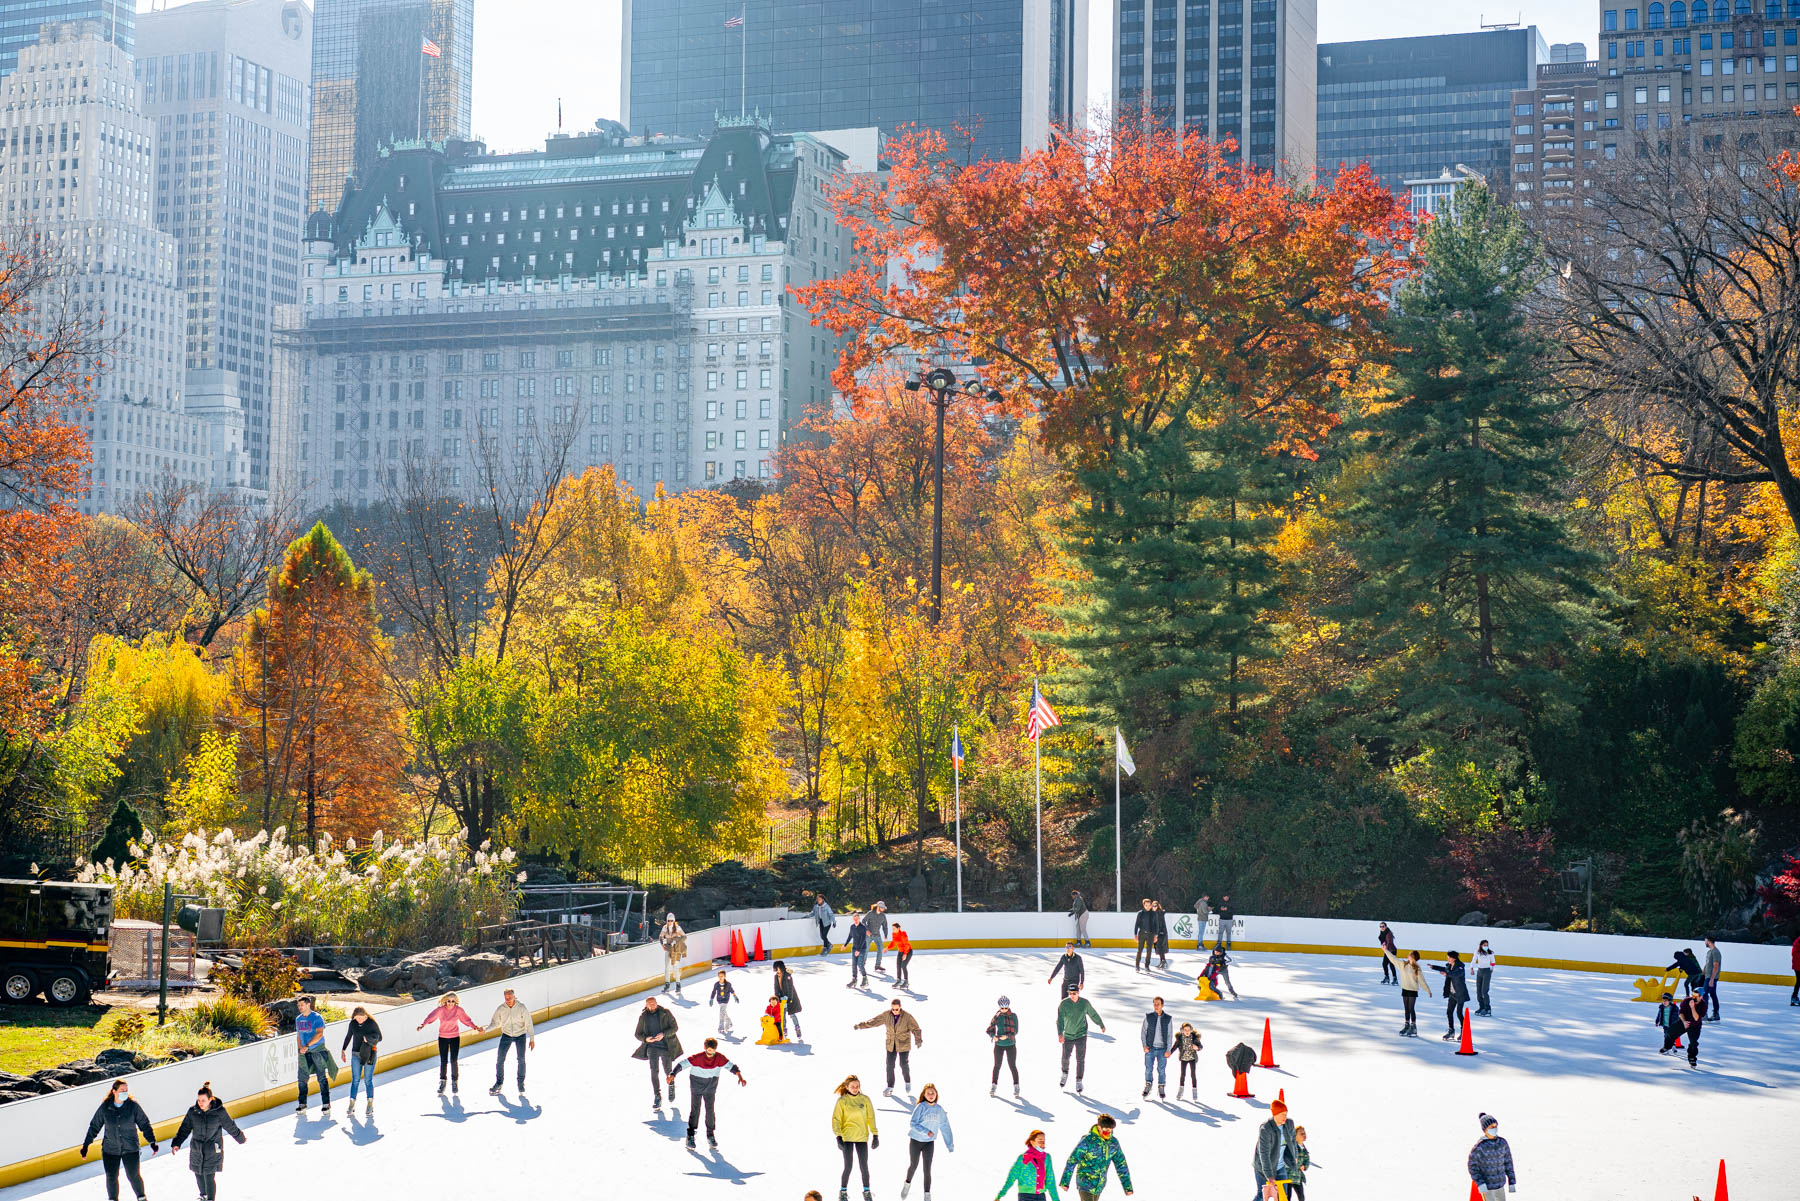 Best ice skating NYC
Things to Do for Christmas in NYC with Kids